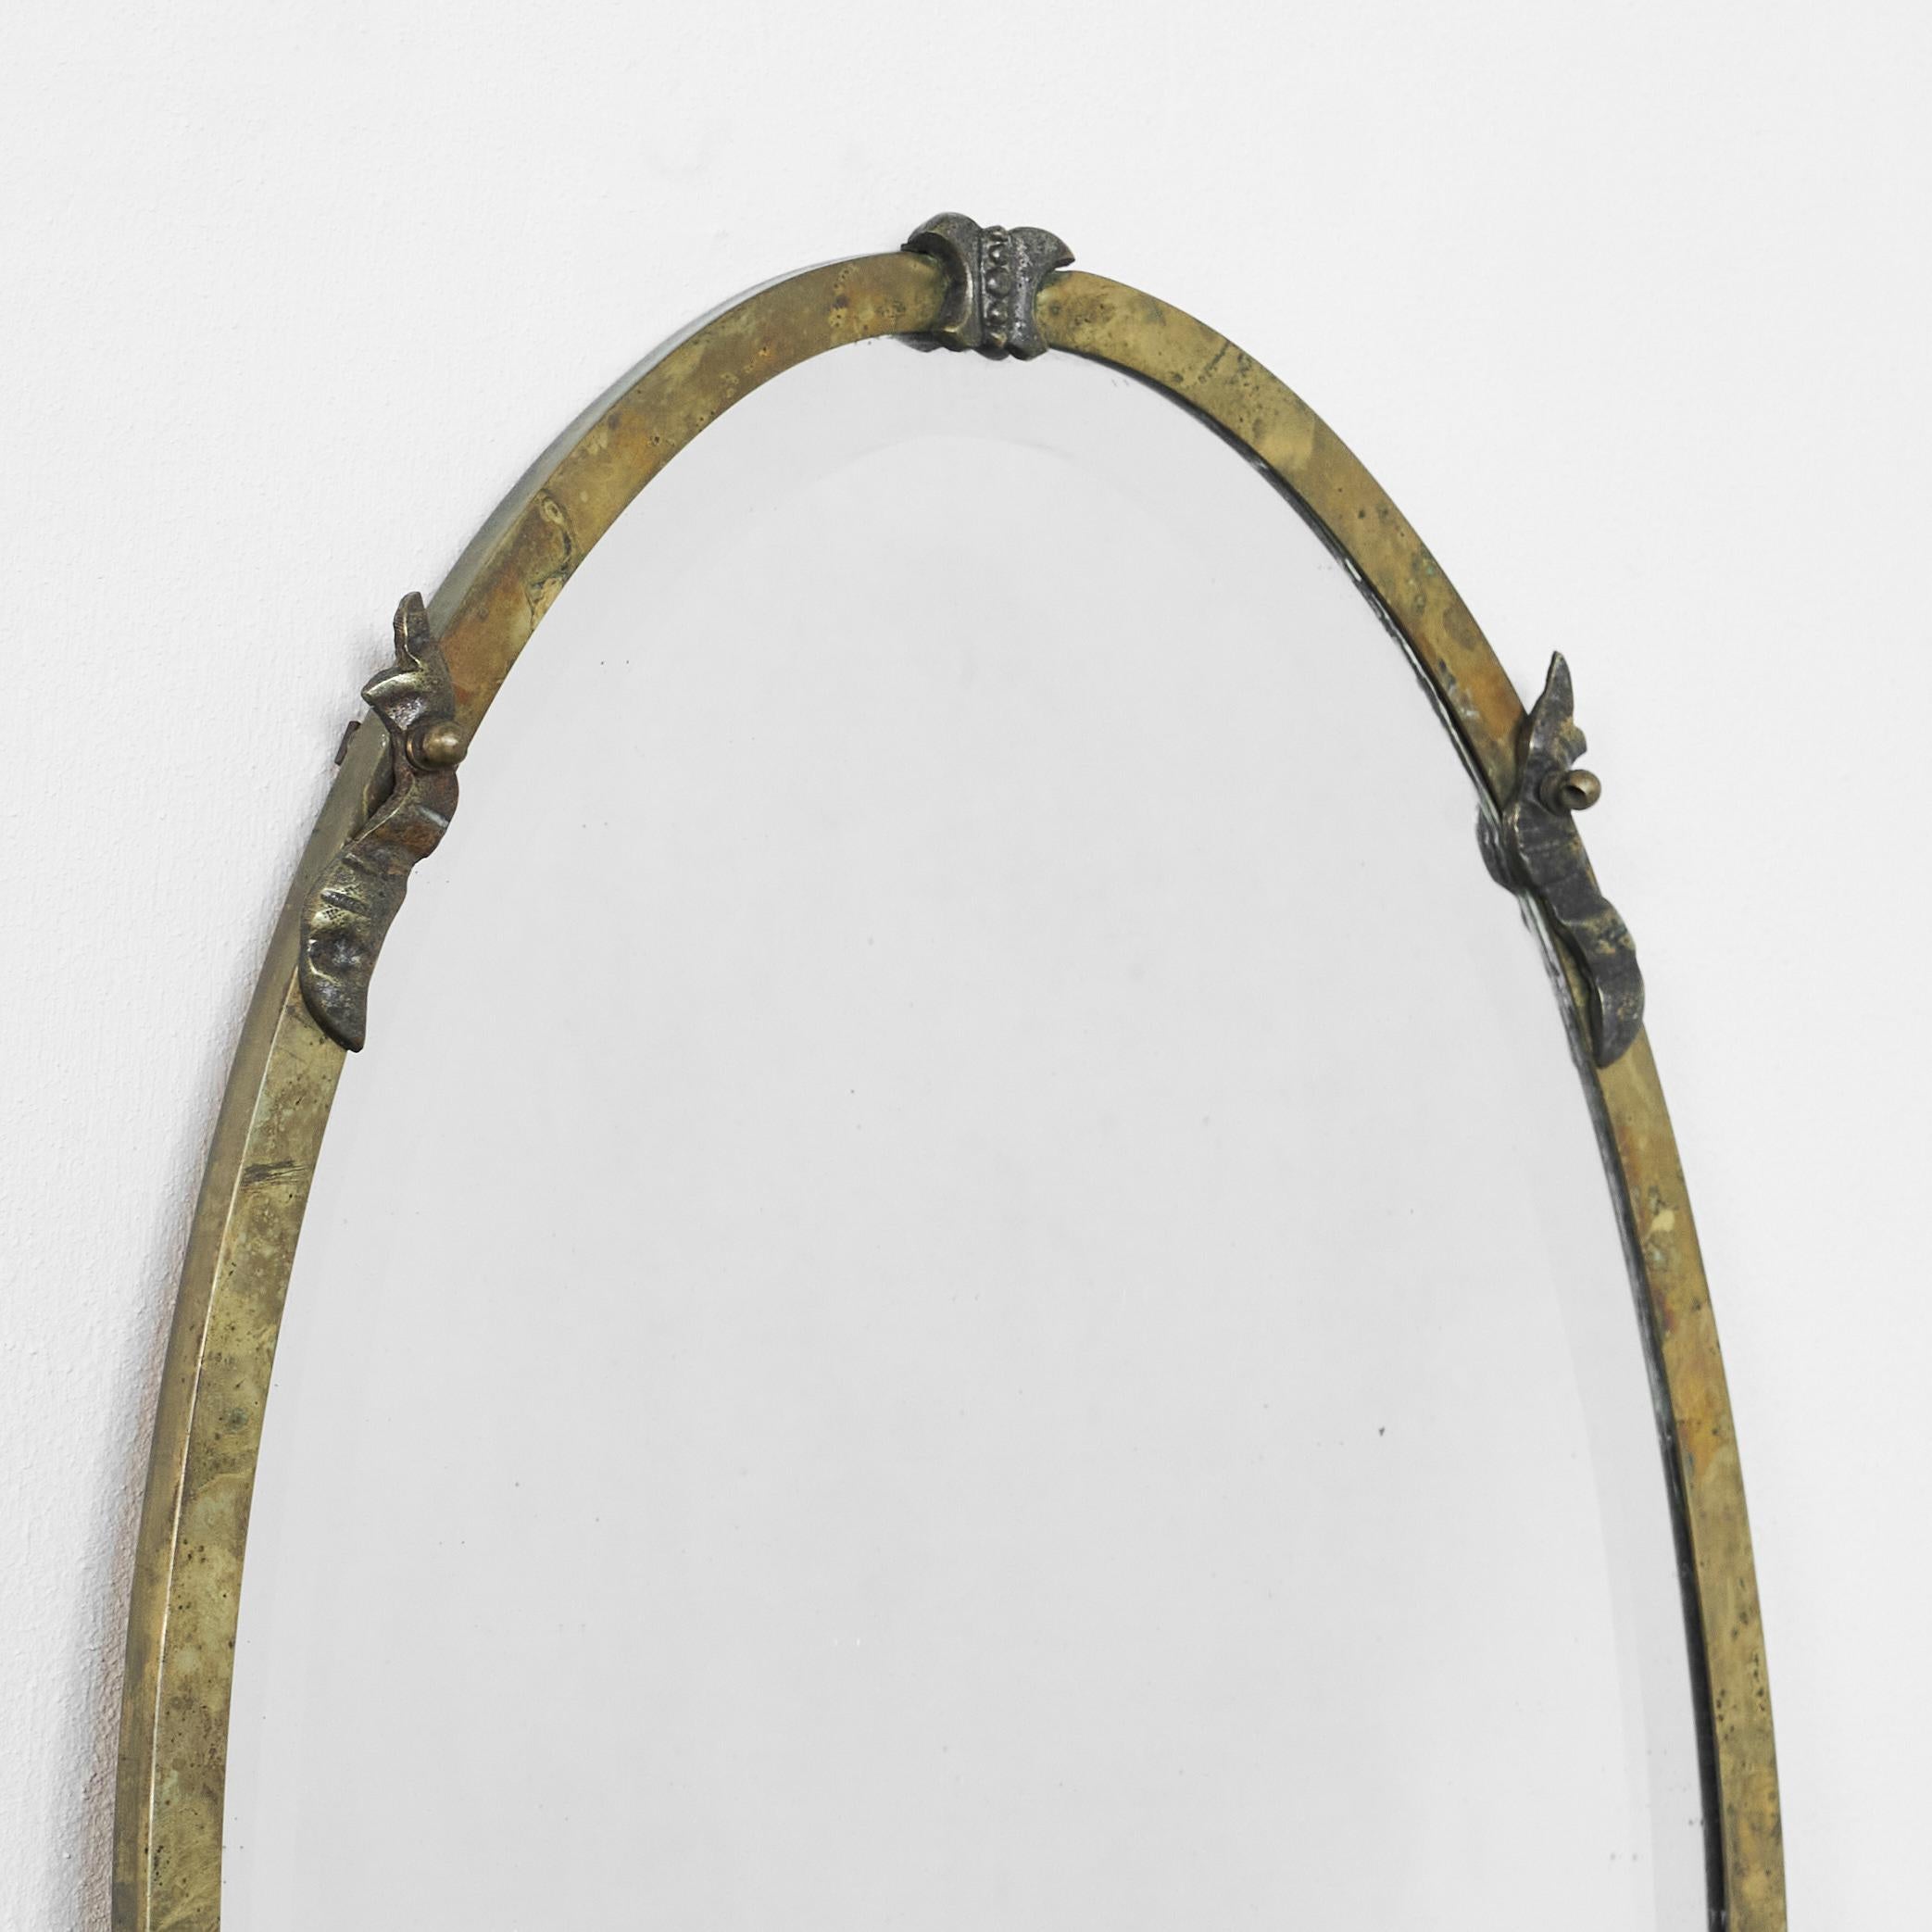 European Oval Art Deco Mirror in Patinated Brass and Beveled Glass 1930s For Sale